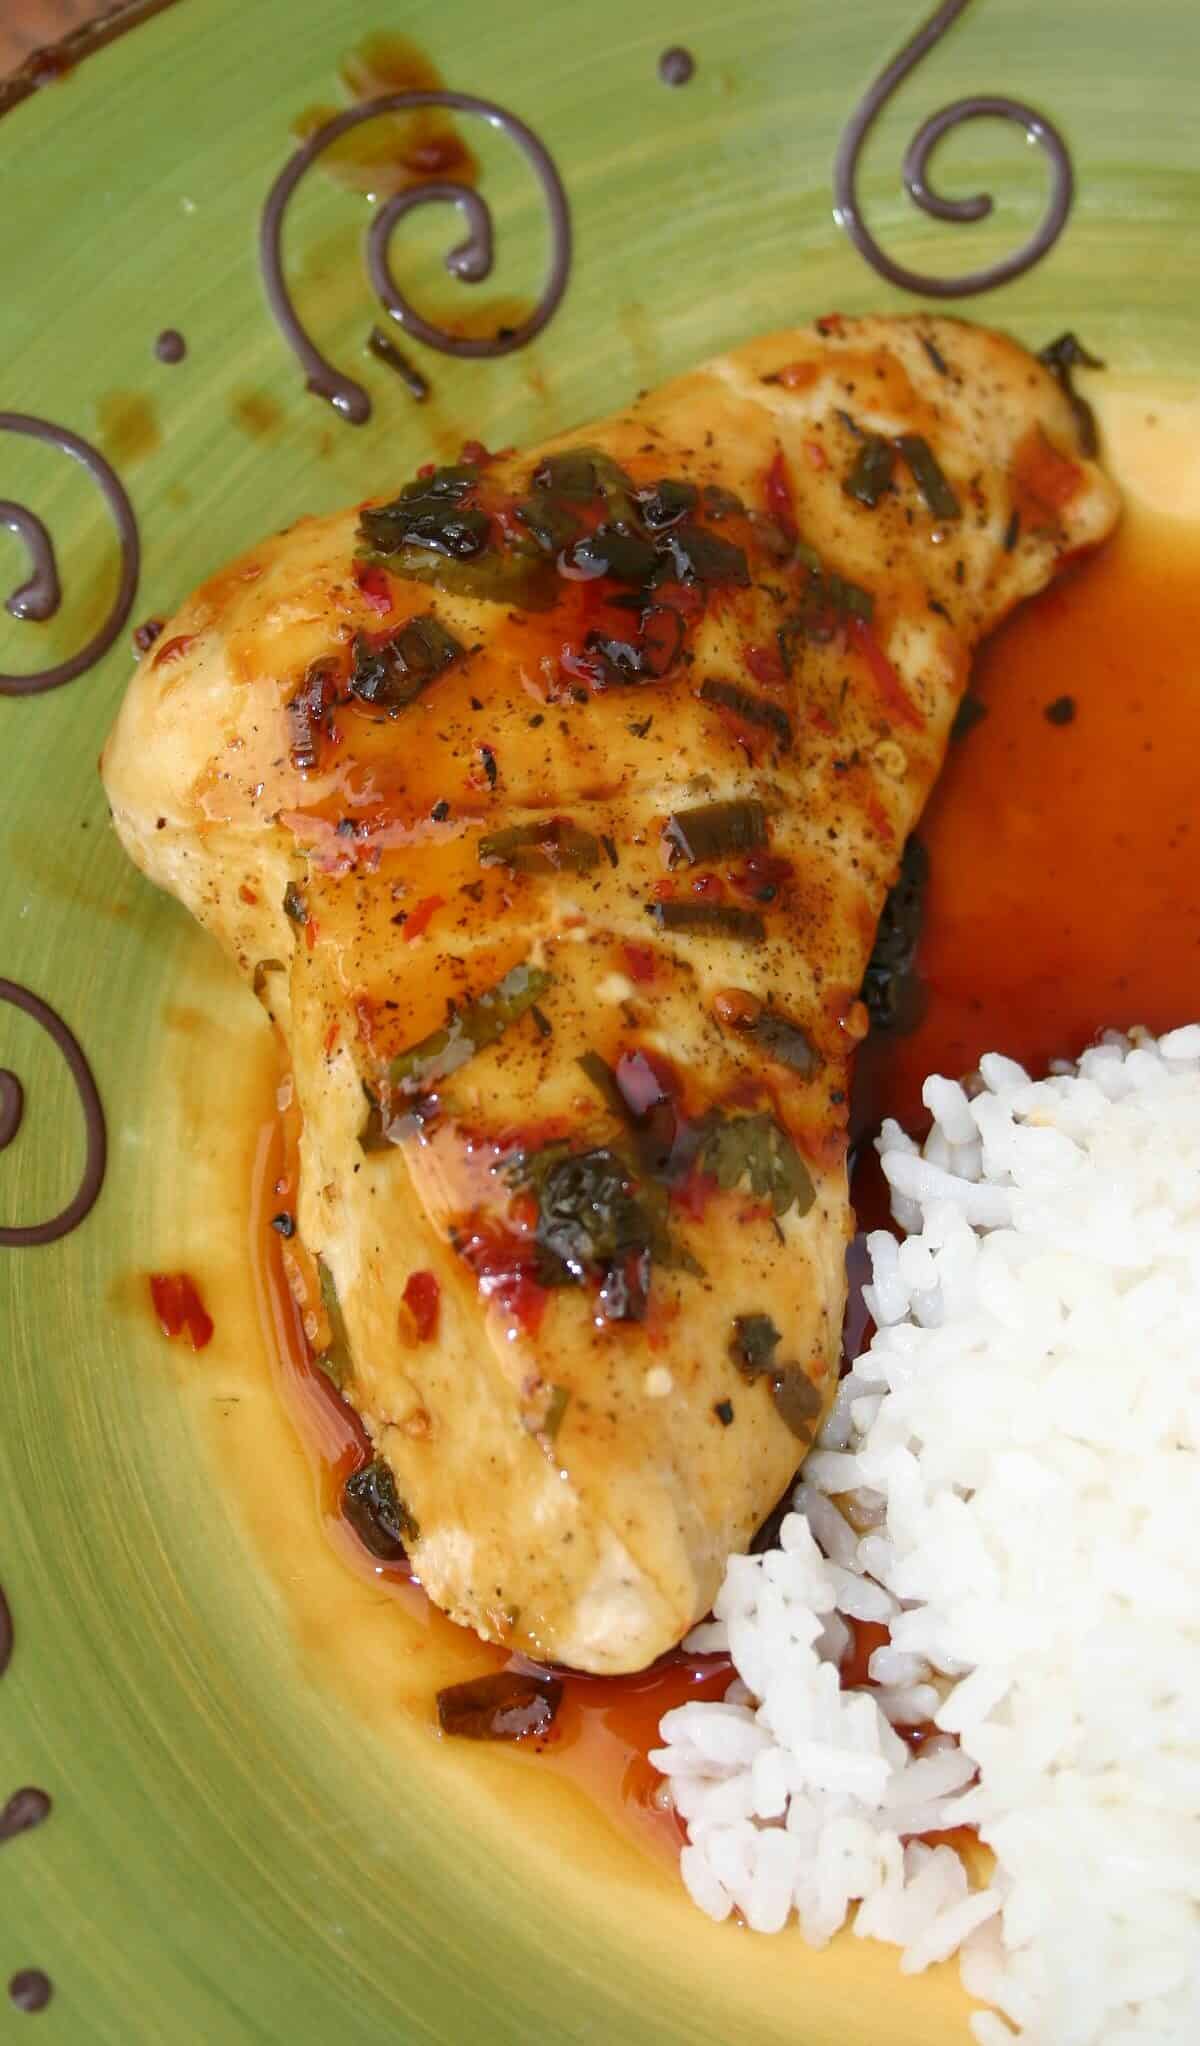  Juicy, flavorful Caribbean-inspired chicken